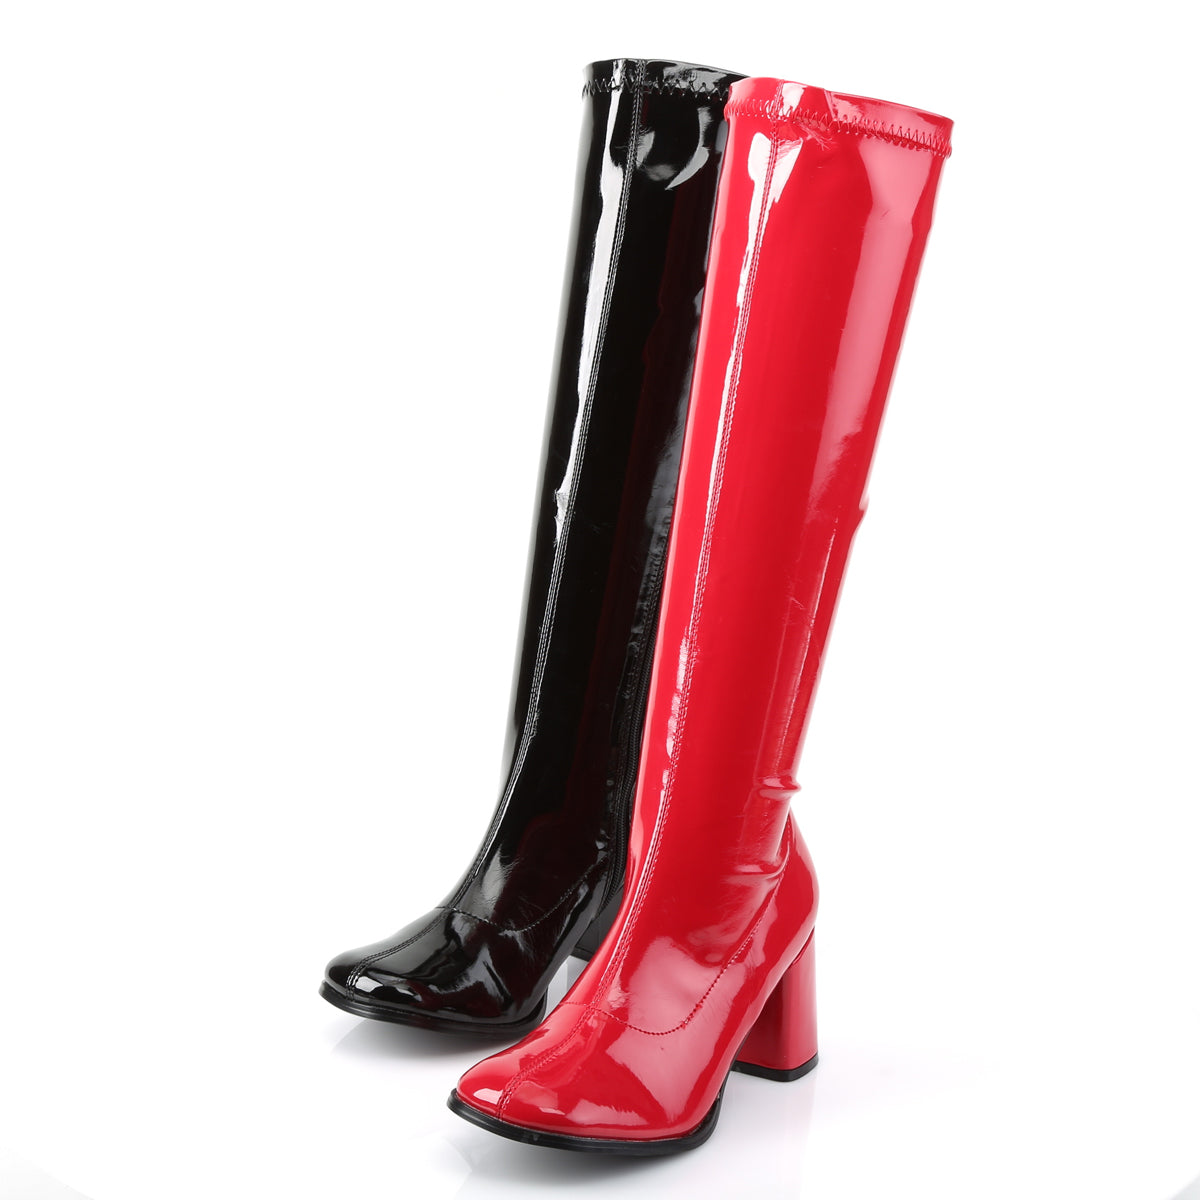 GOGO-300HQ 3 Inch Heel Black and Red Women's Boots Funtasma Costume Shoes 